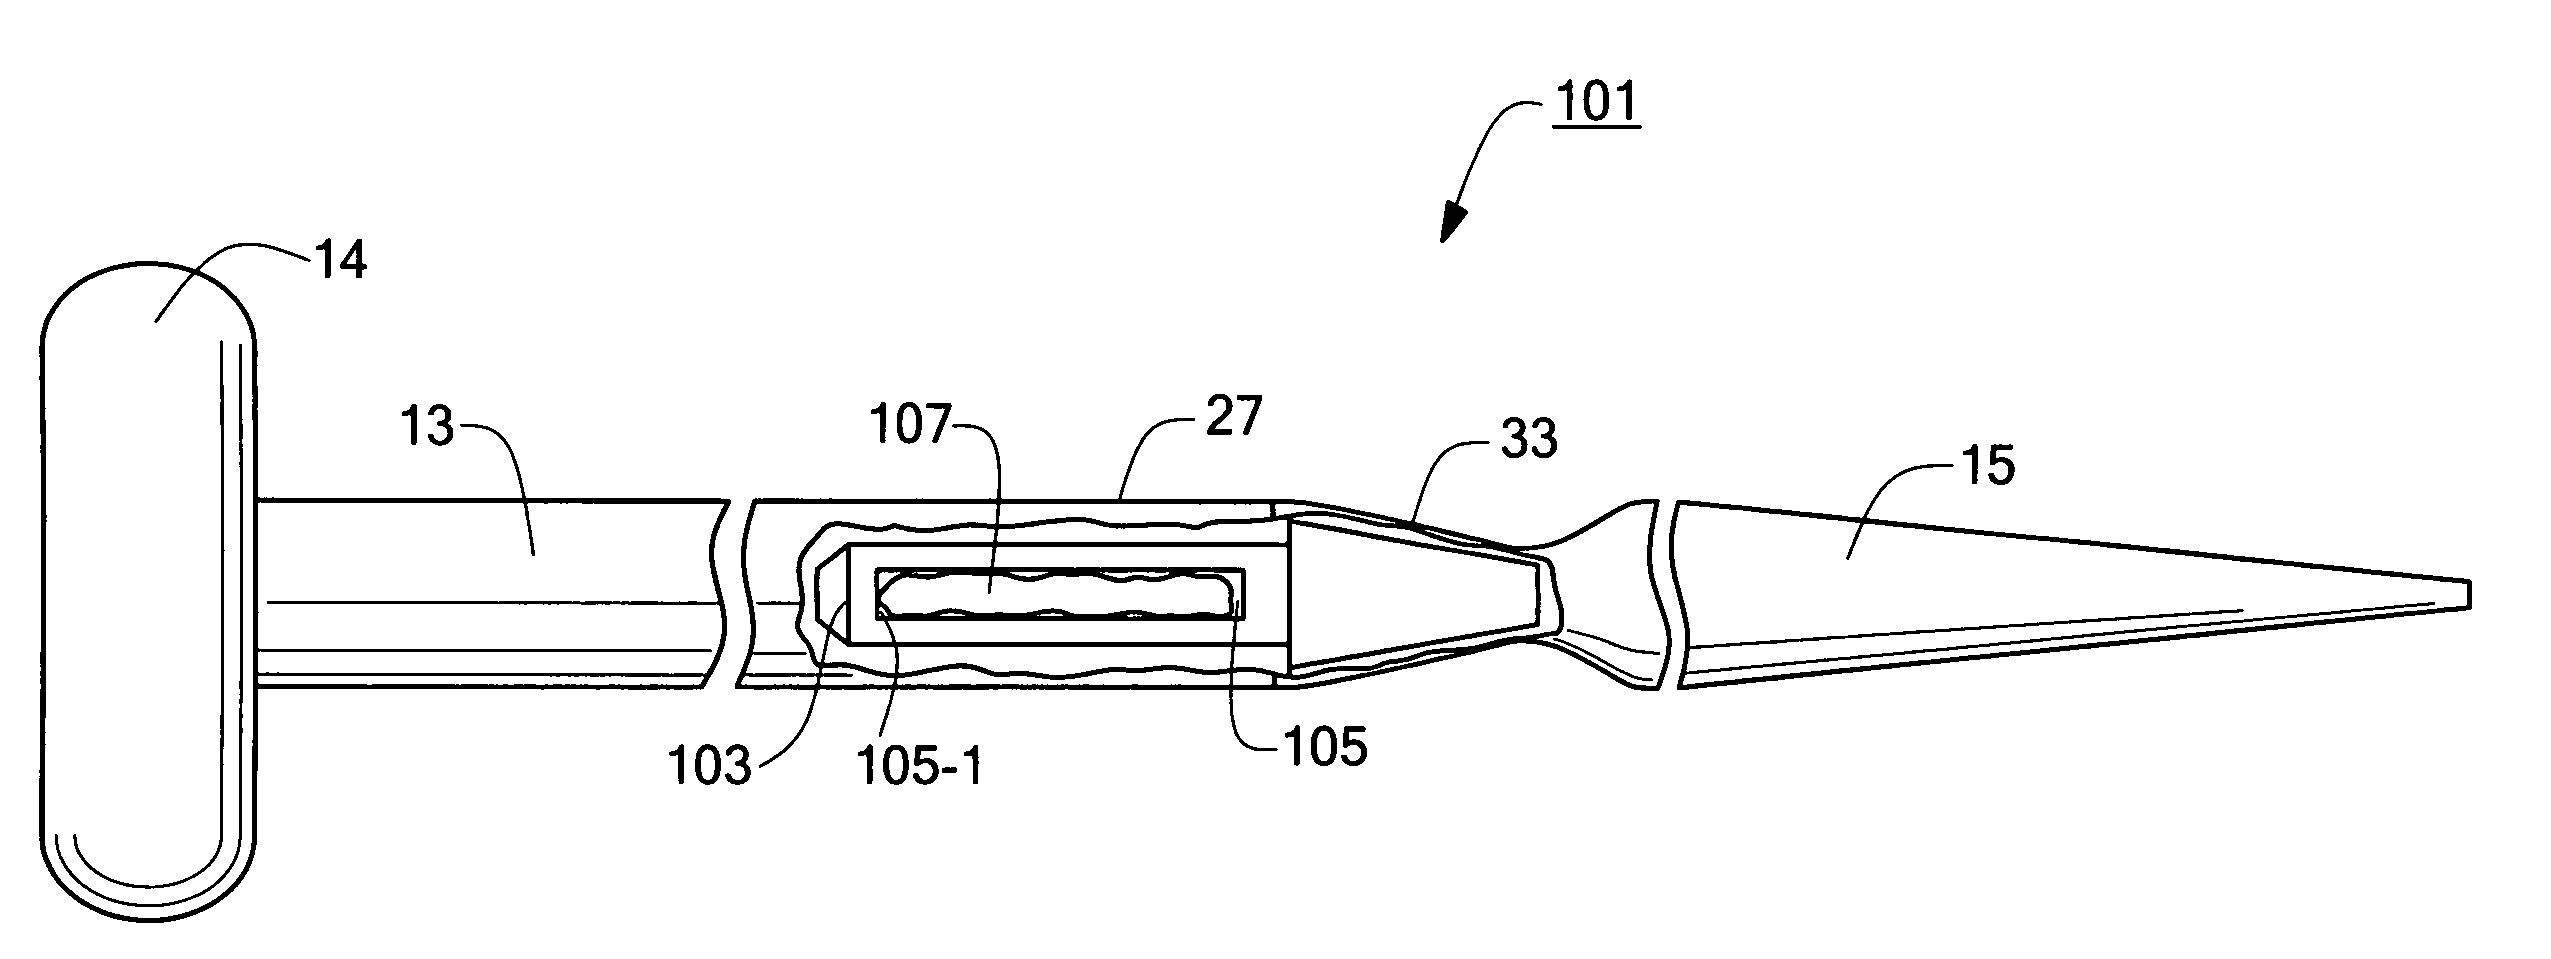 Connector for use with a medical catheter and medical catheter assembly